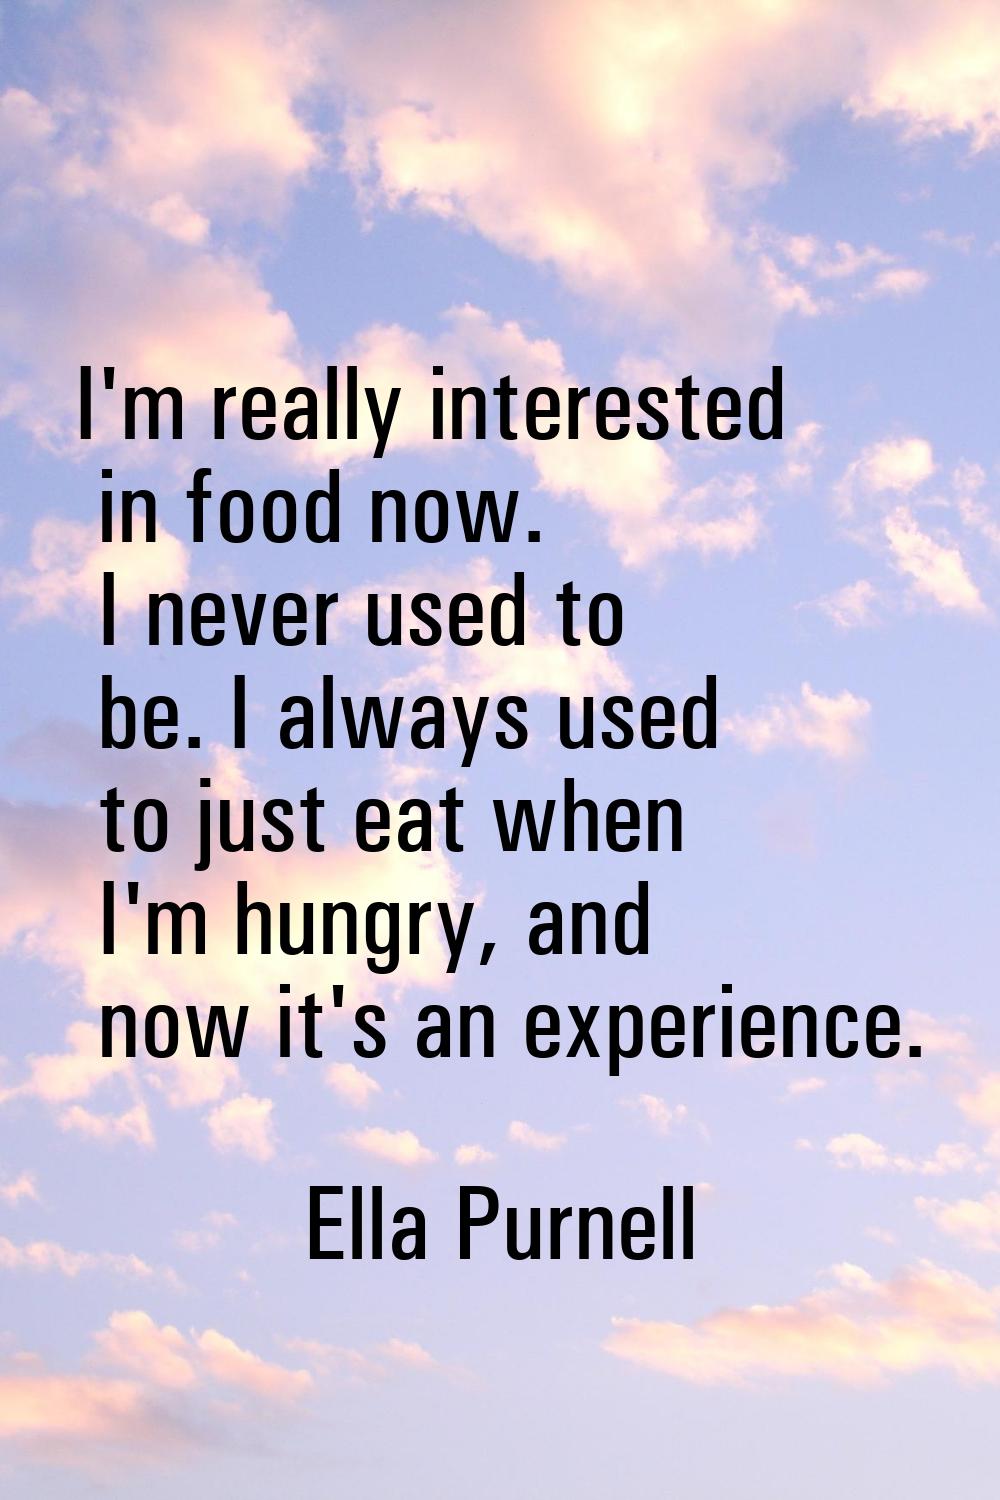 I'm really interested in food now. I never used to be. I always used to just eat when I'm hungry, a